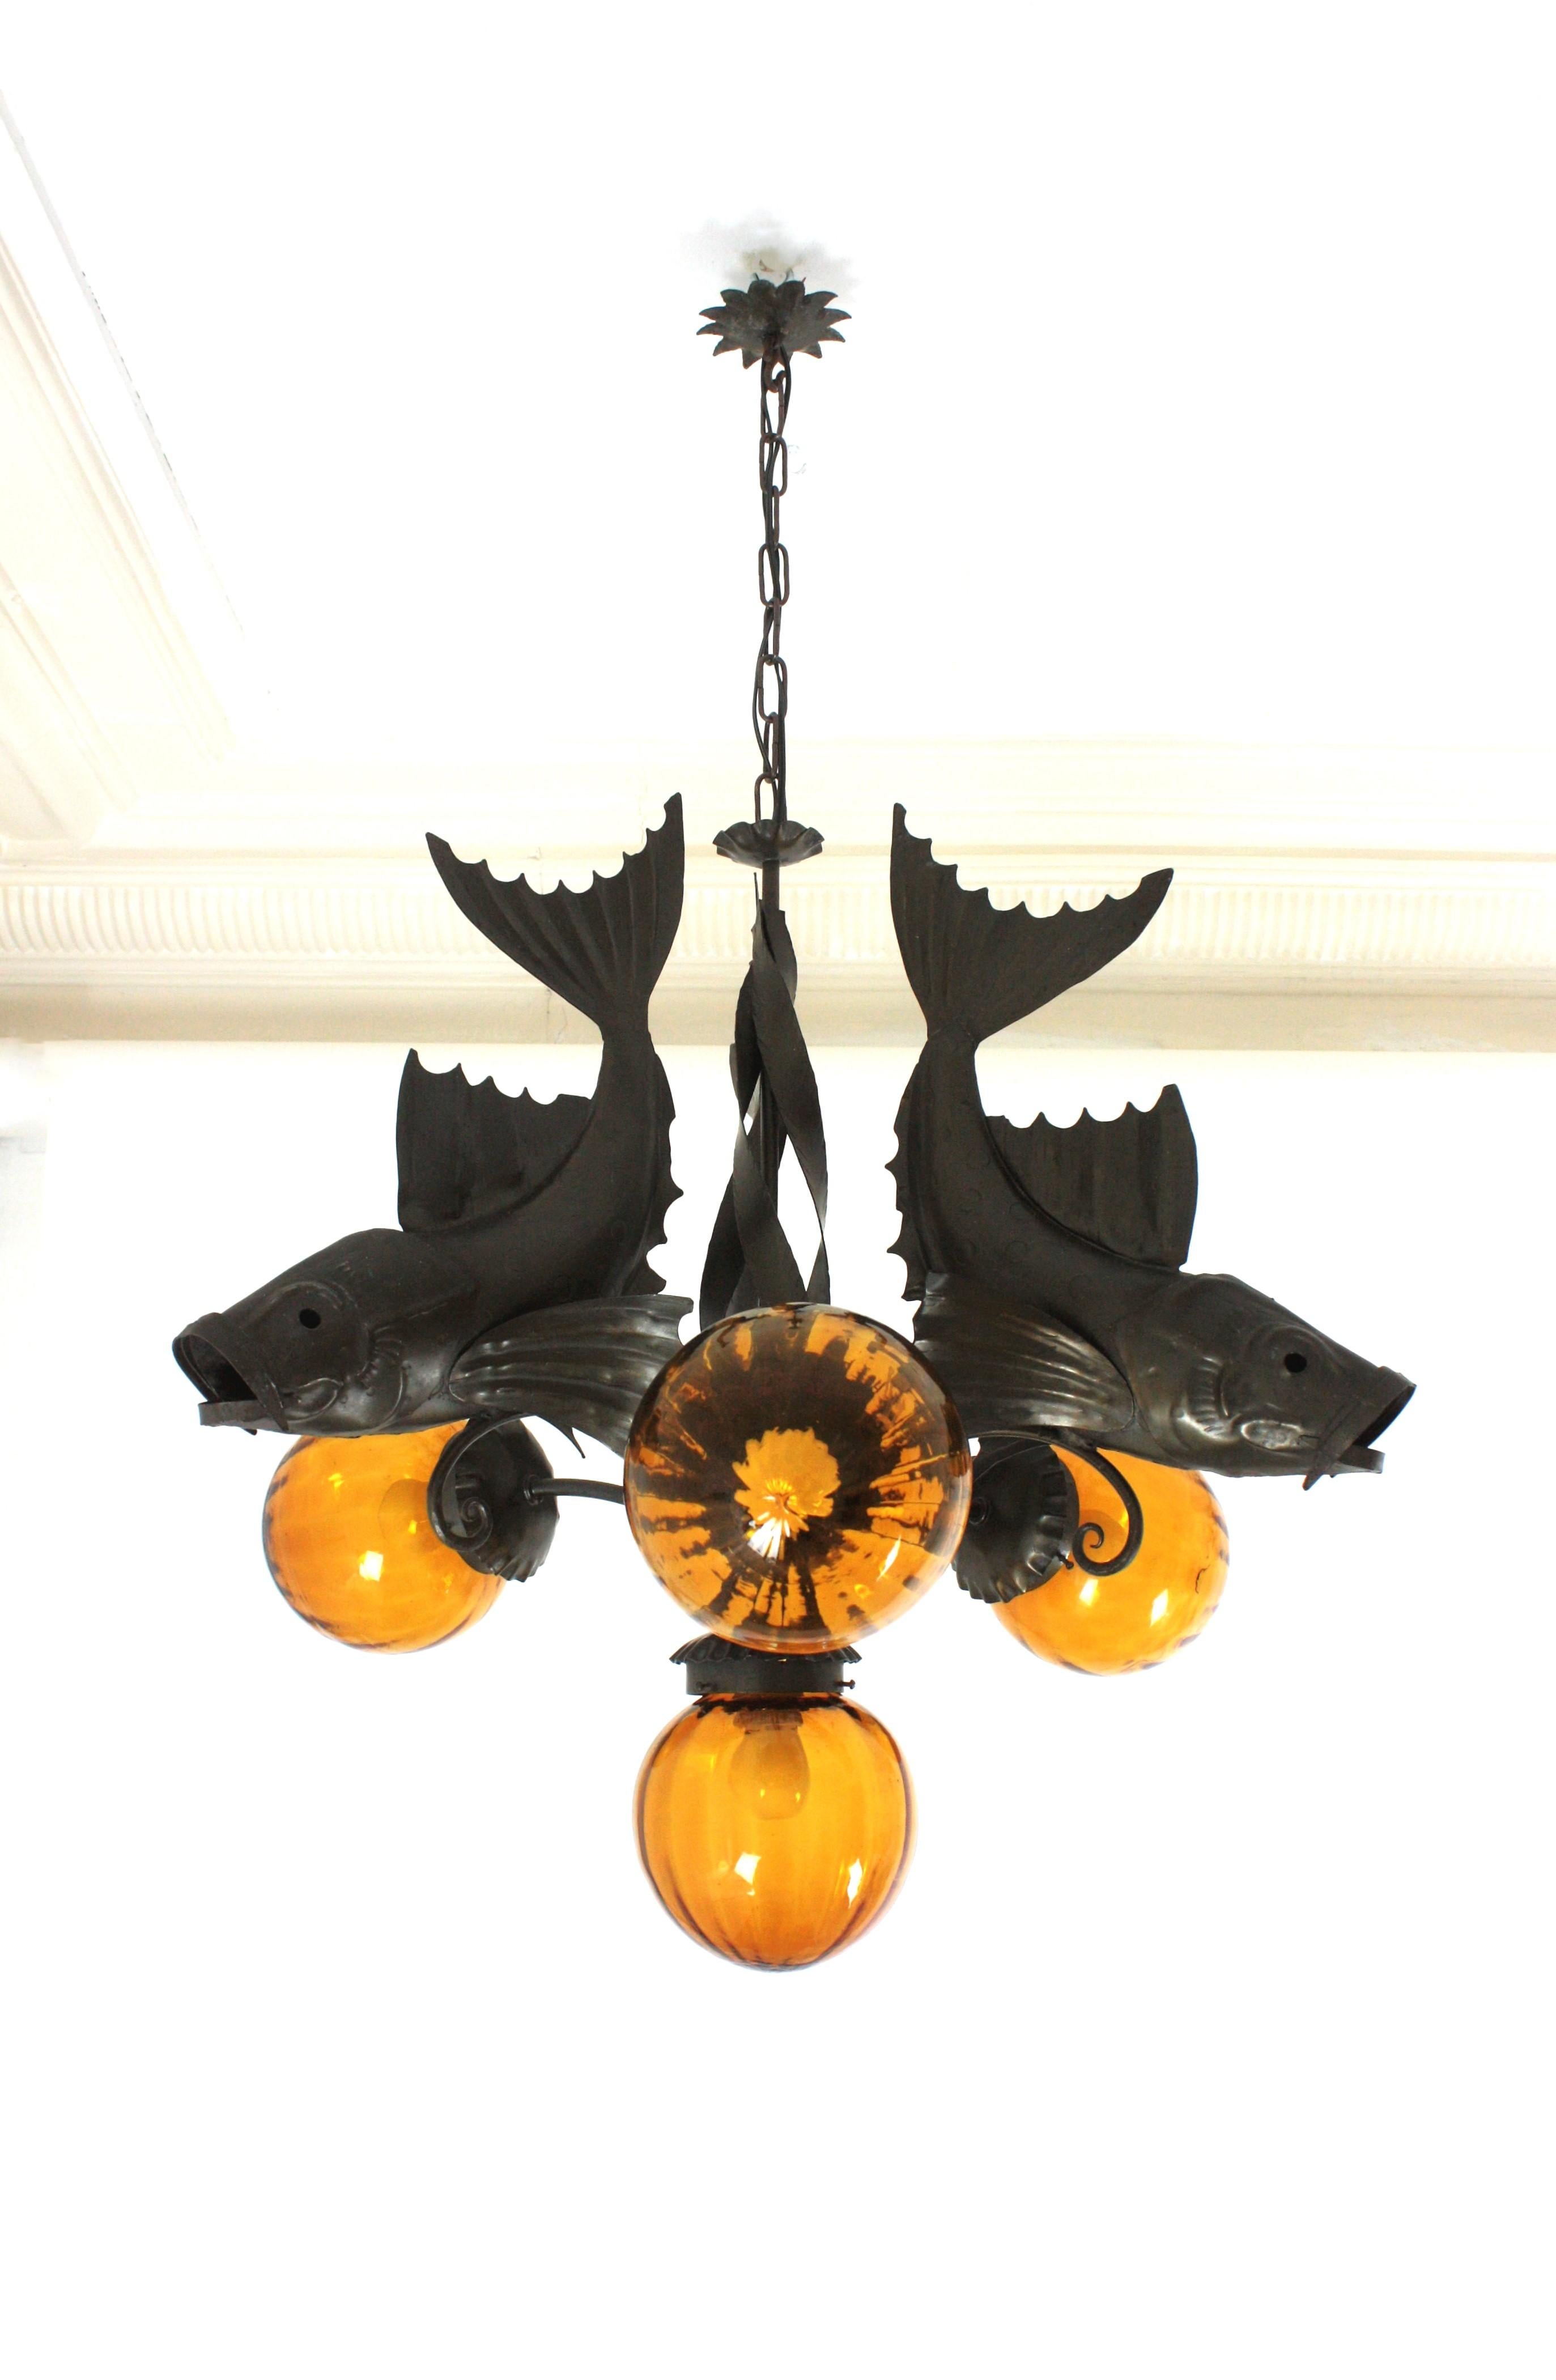 Large Wrought Iron Fishes Chandelier with Blown Glass Globe Shades. Spain, 1950s-1960s
Rare find.
This four-light ceiling lamp was handcrafted in Spain at the Mid-Century Modern period in the style of Brutalism. 
It features 3 large iron fishes